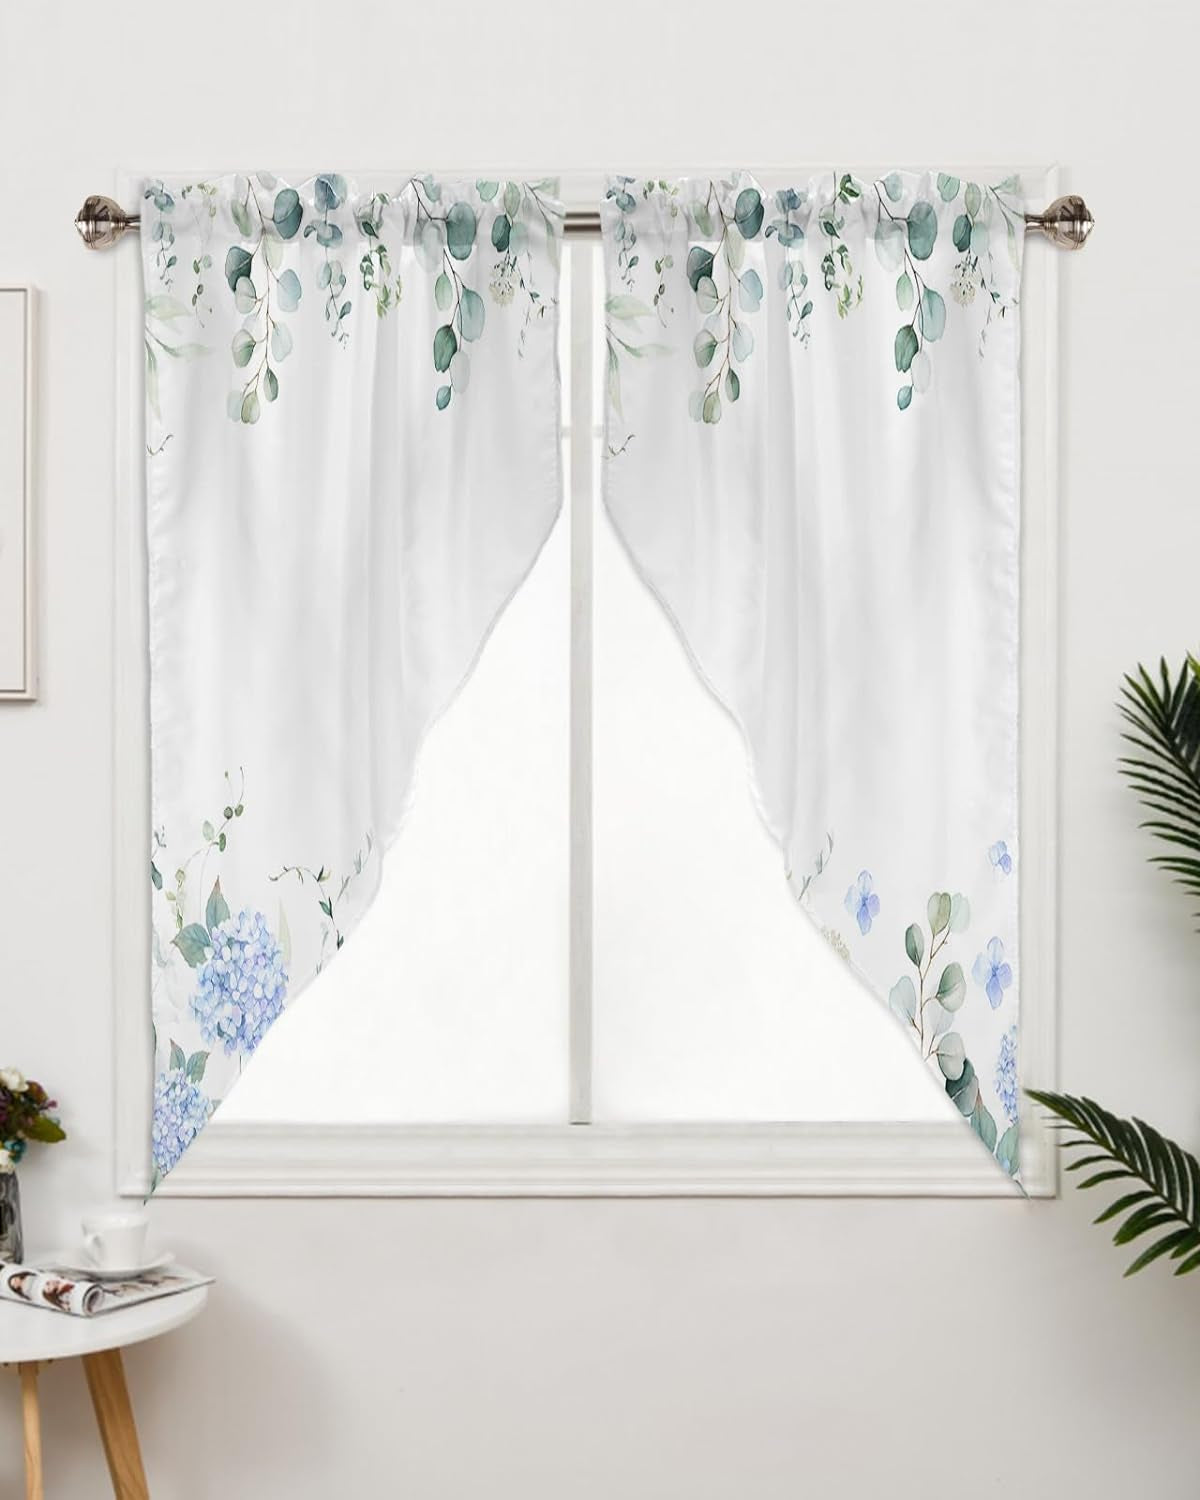 Eucalyptus Hydrangea Swag Curtains for Living Room/Kitchen/Bedroom/Bathroom, Swag Valance Curtains Short Half Kitchen Topper Curtains Window Swag 2 Panels 28X36 Watercolor Flowers Rustic Chic Plant